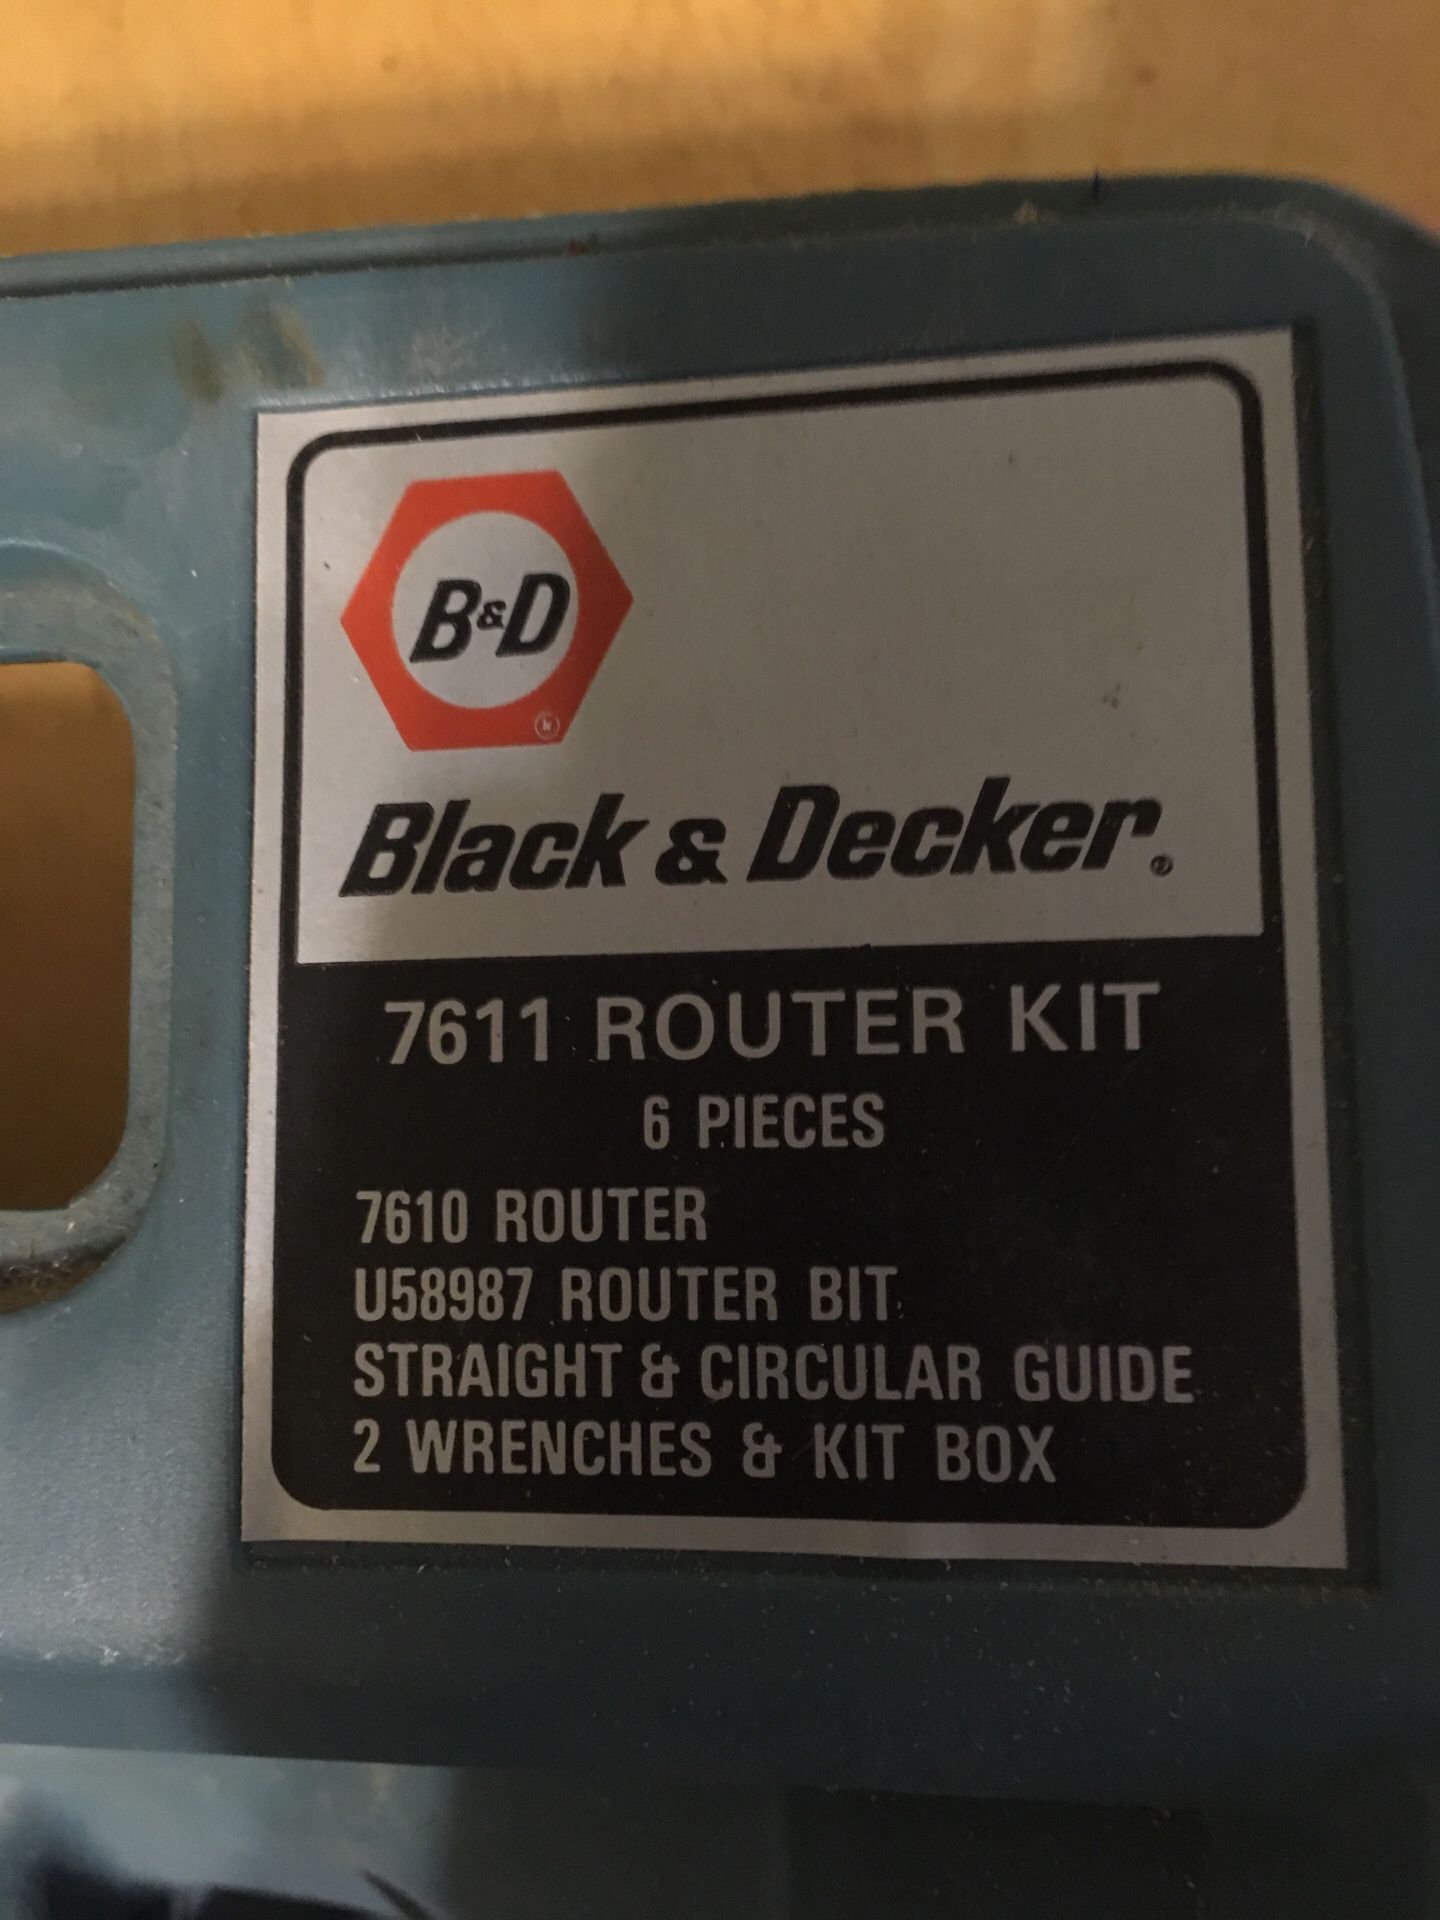 Black and decker 7611 Router kit for Sale in North Wales, PA - OfferUp